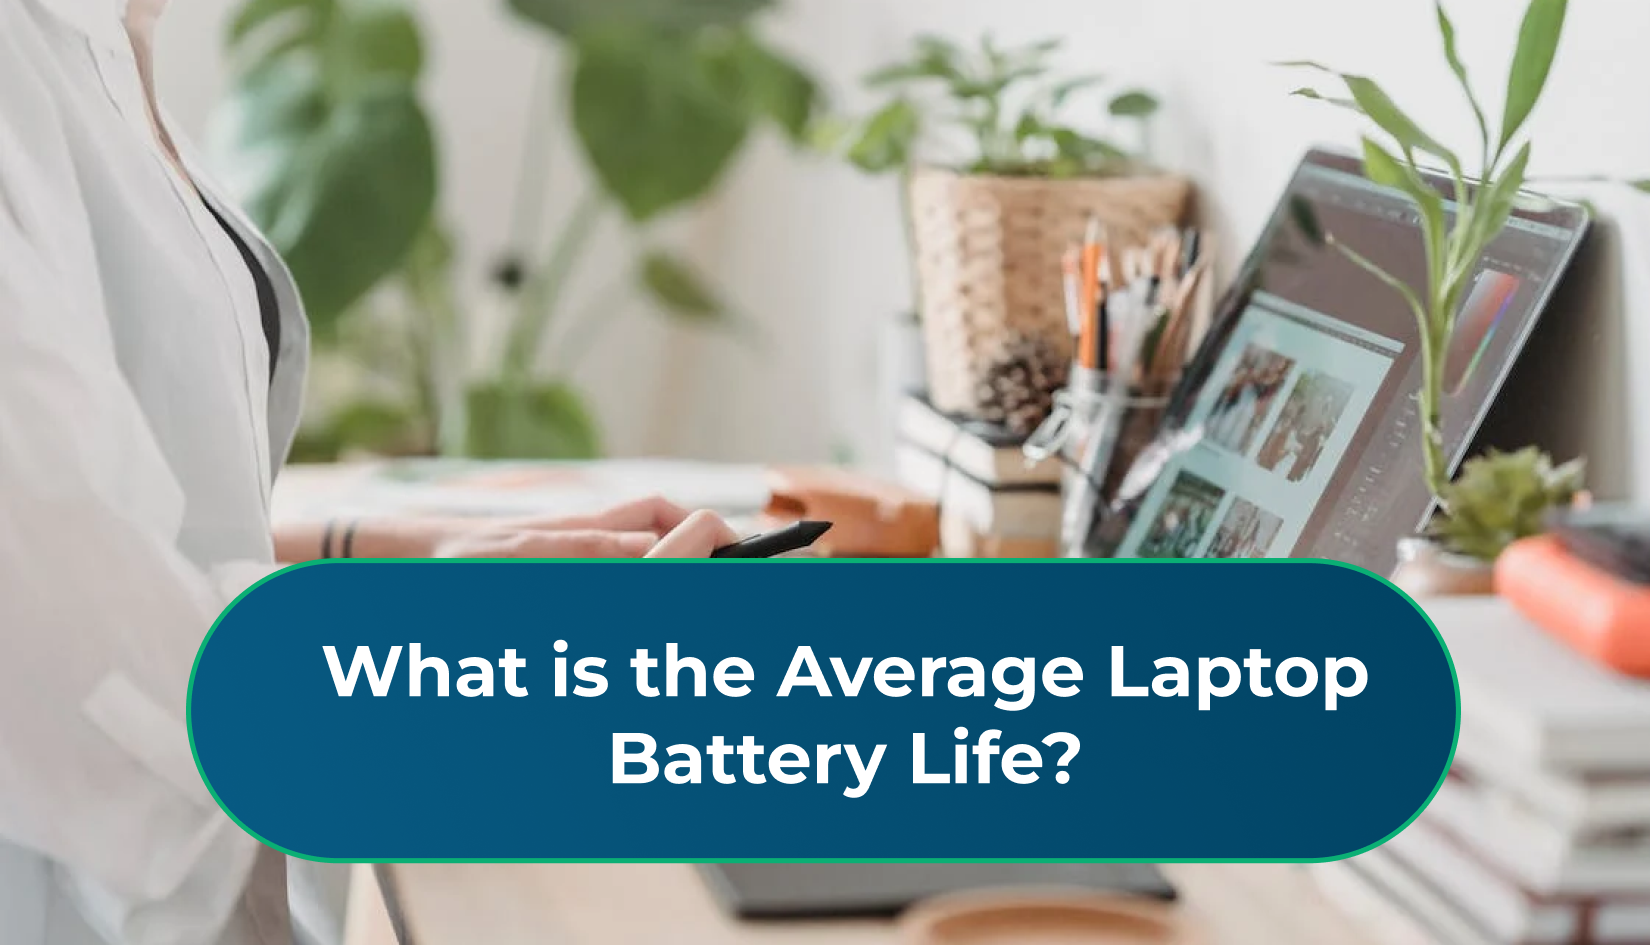 What is the Average Laptop Battery Life?